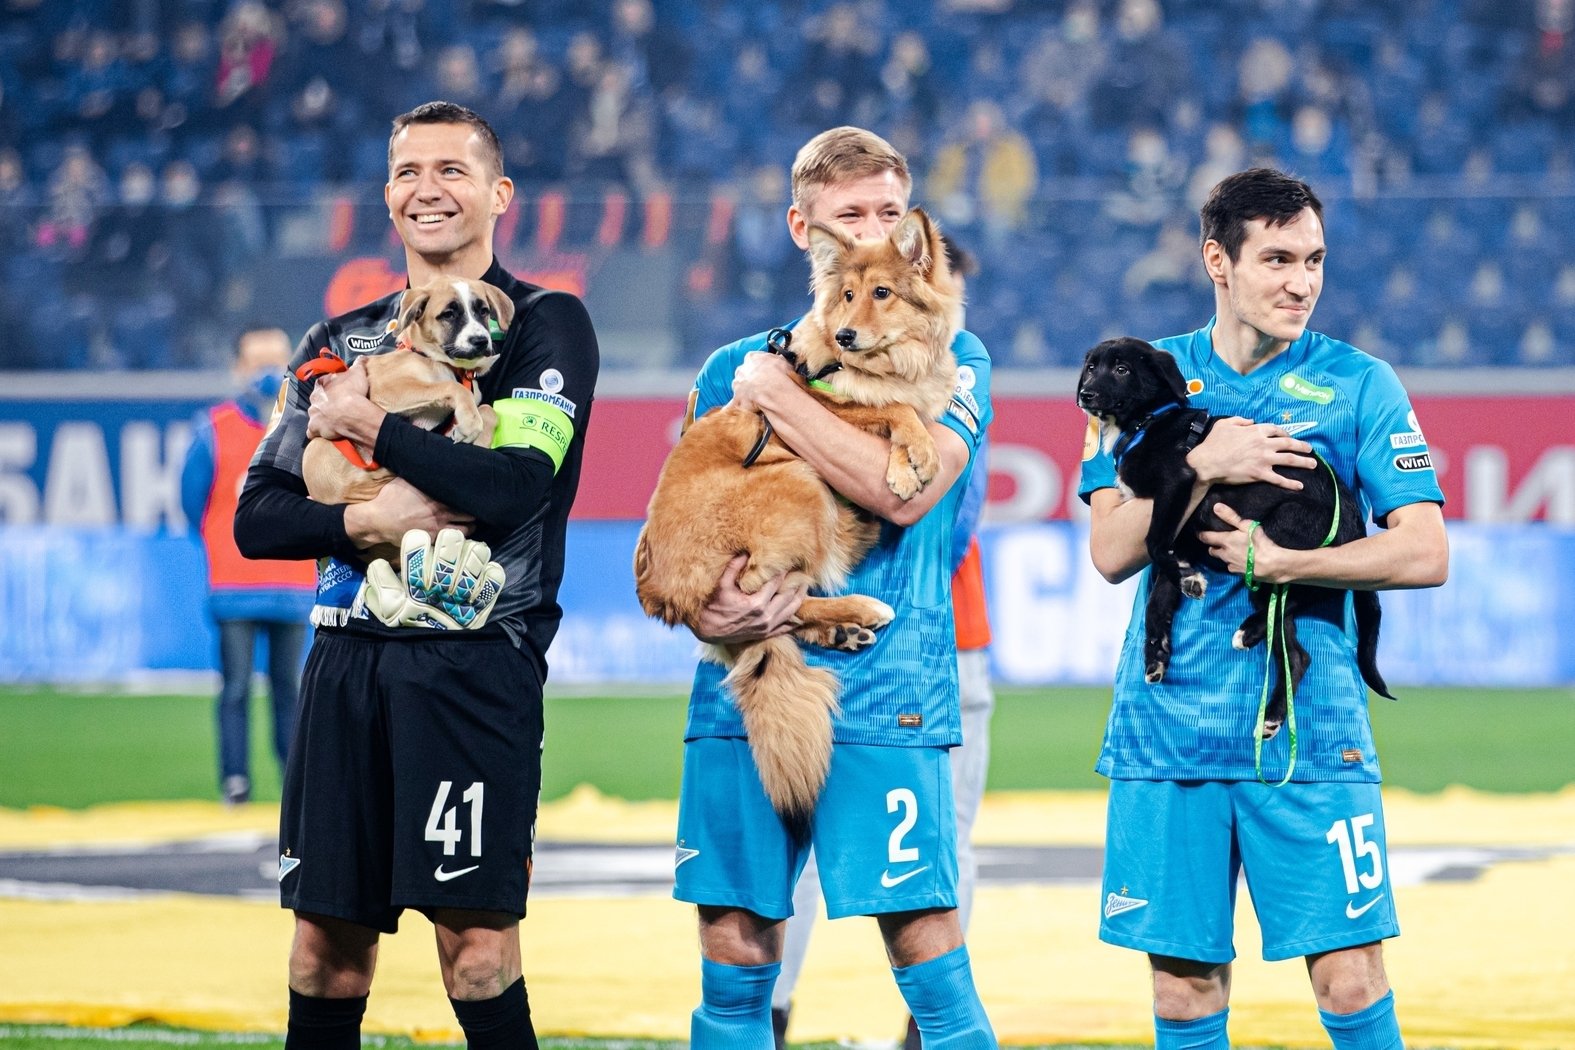 Zenit players Mikhail Kerzhakov (L), Dmitri Chistyakov (C) and Vyacheslav Karavaev can be seen holding dogs, before the start of the Russian Premier League match against Rostov at the Gazprom Arena, Saint Petersburg, Russia, Dec. 3, 2021. (Photo from Football Club Zenit website)
